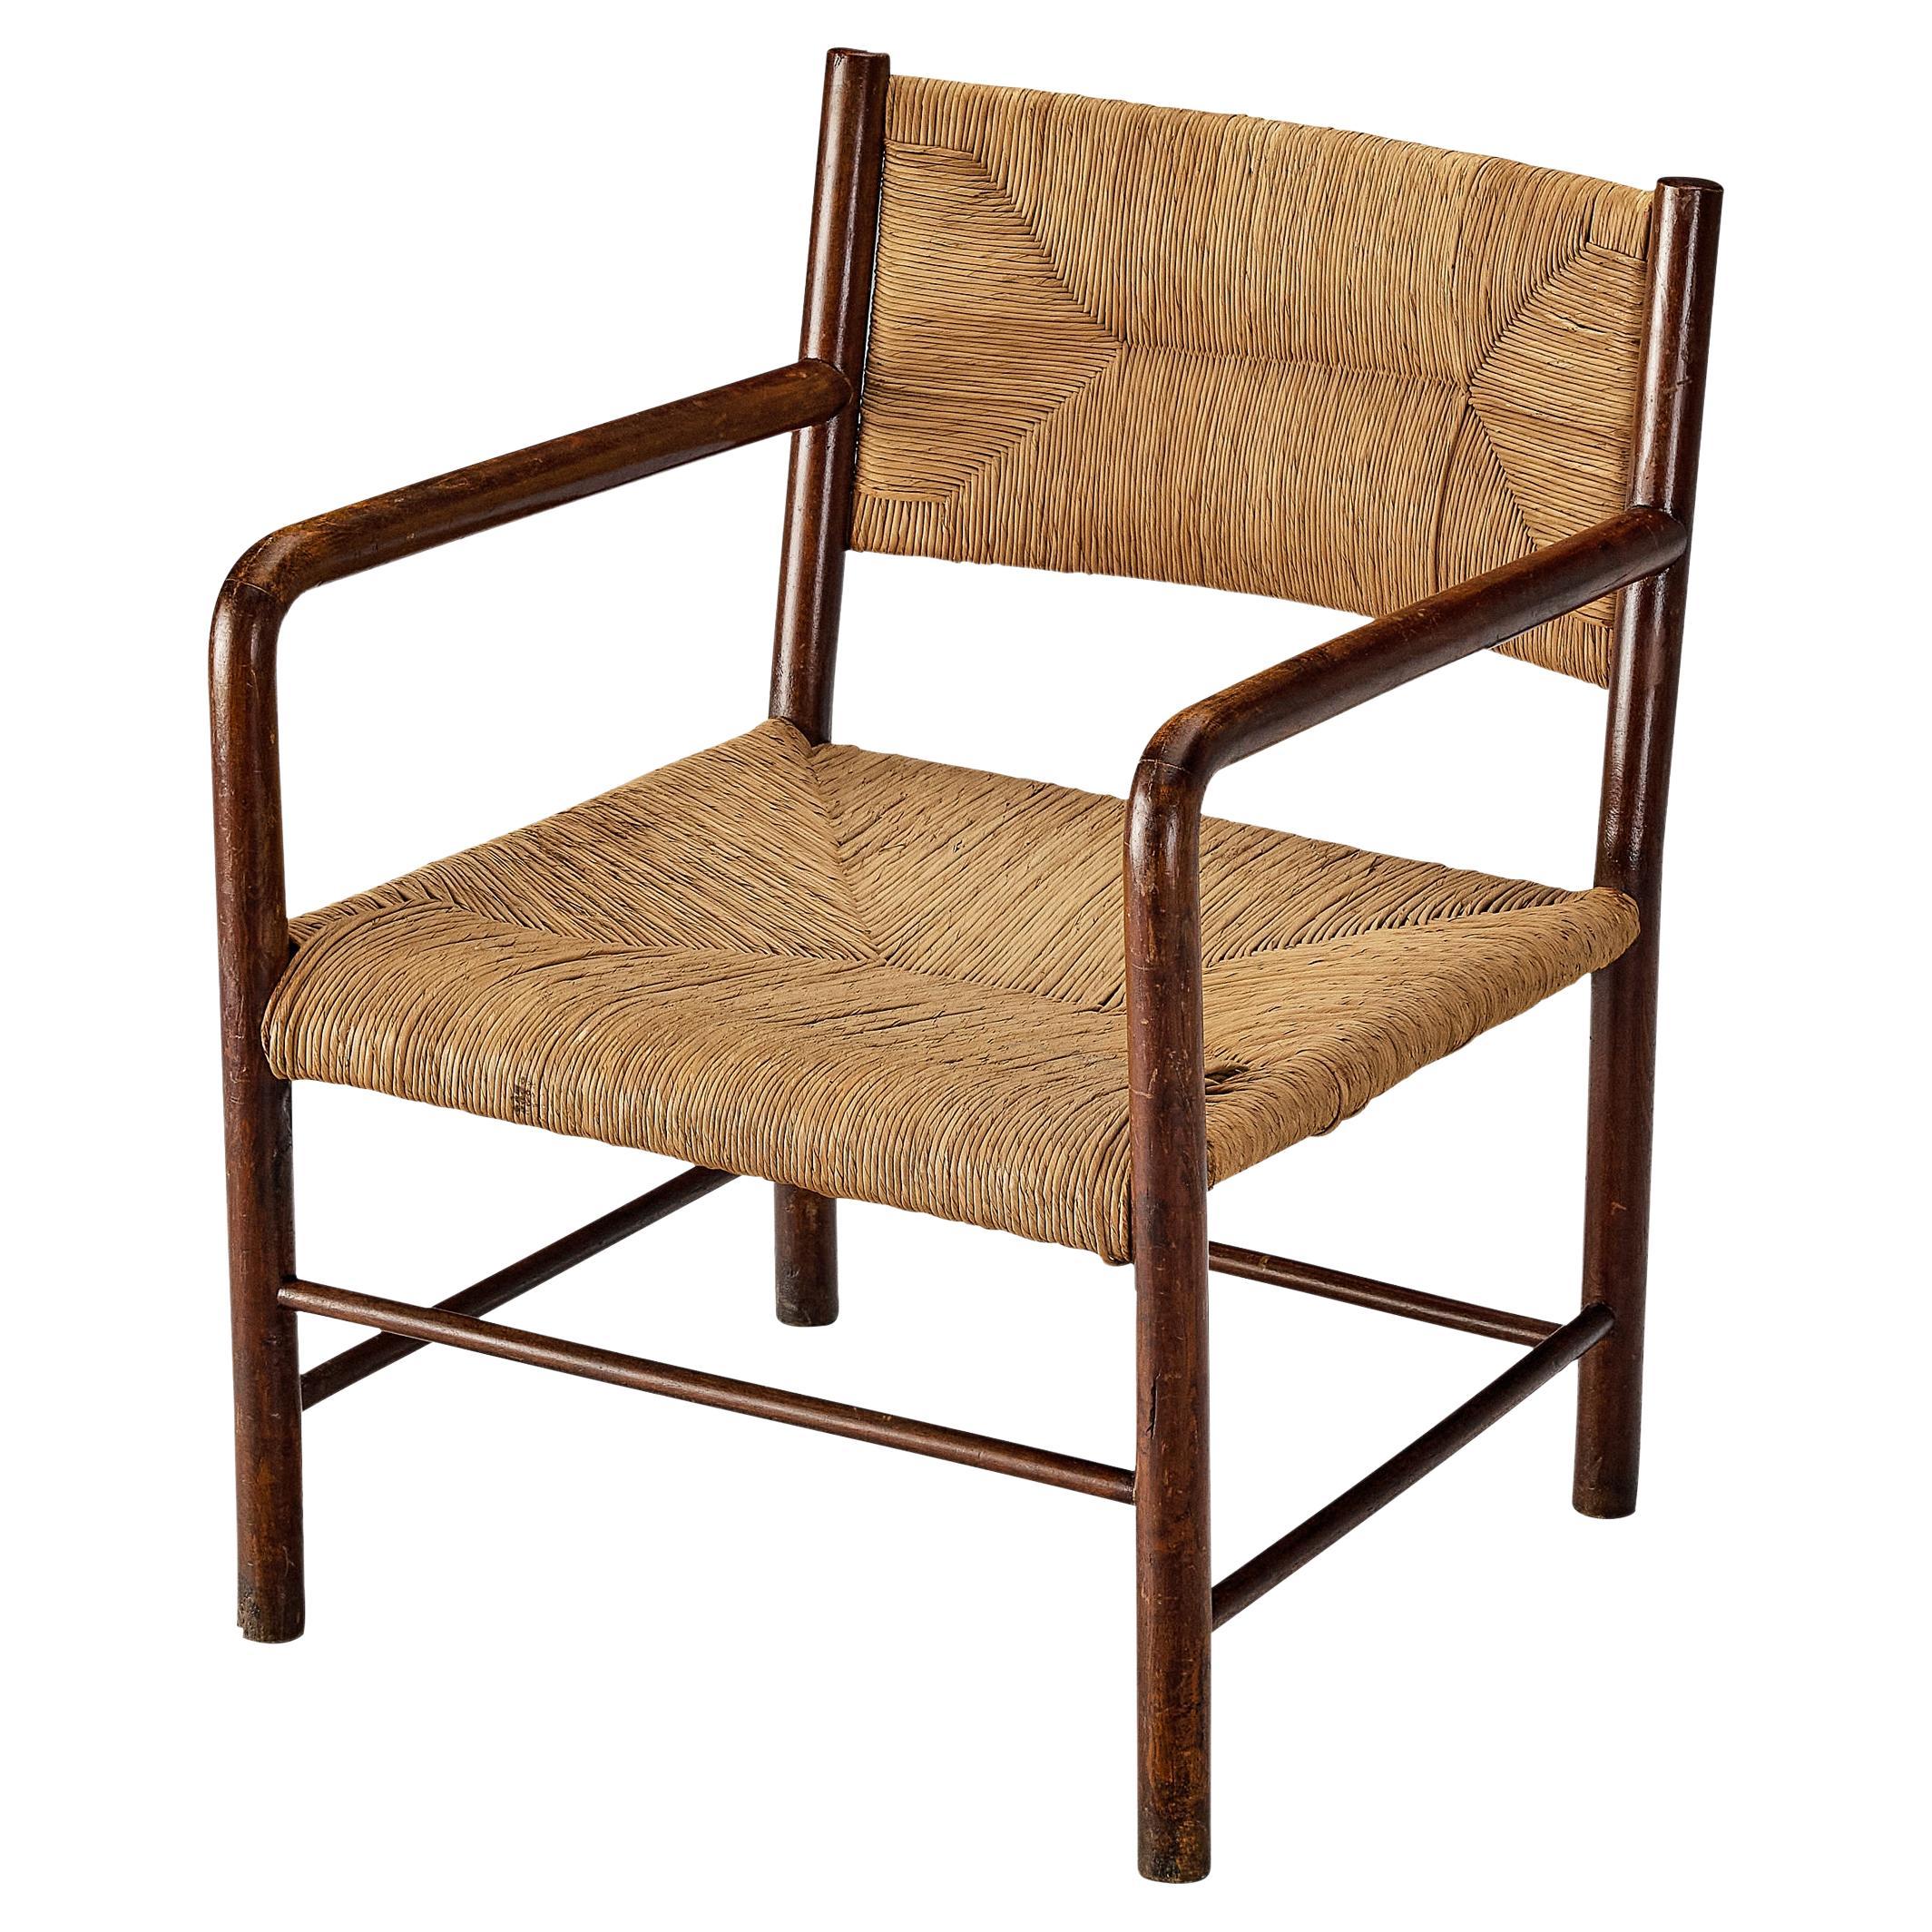 Emanuele Rambaldi for Chiappe Armchair in Wood and Woven Straw 